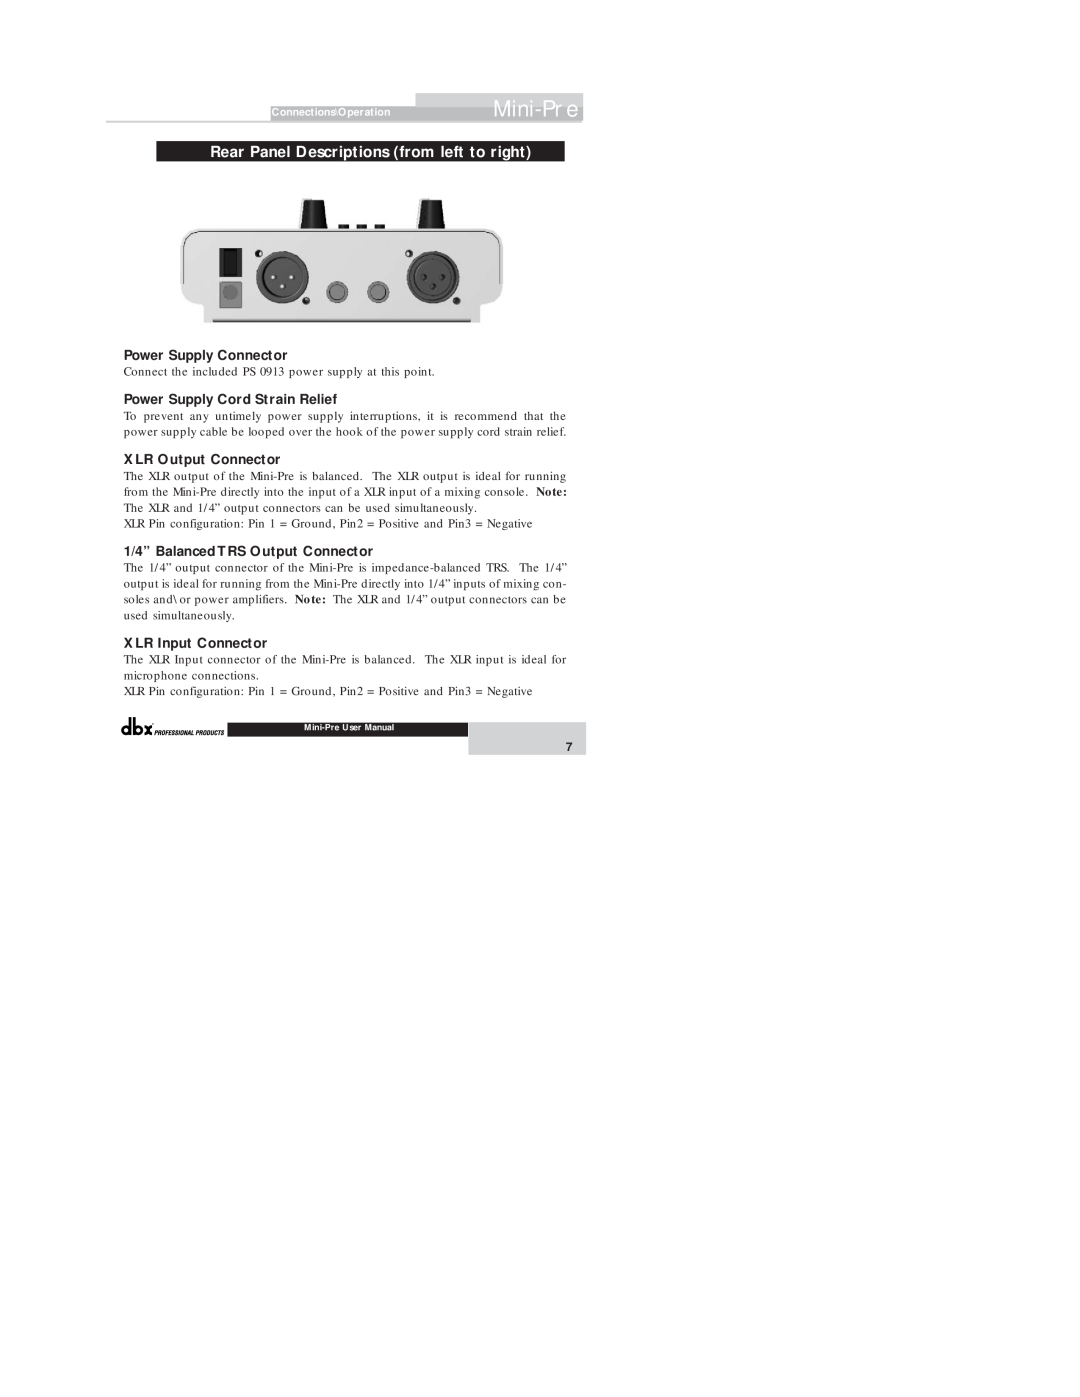 dbx Pro Vacuum Tube Microphone PreAmp user manual Rear Panel Descriptions from left to right, Power Supply Connector 